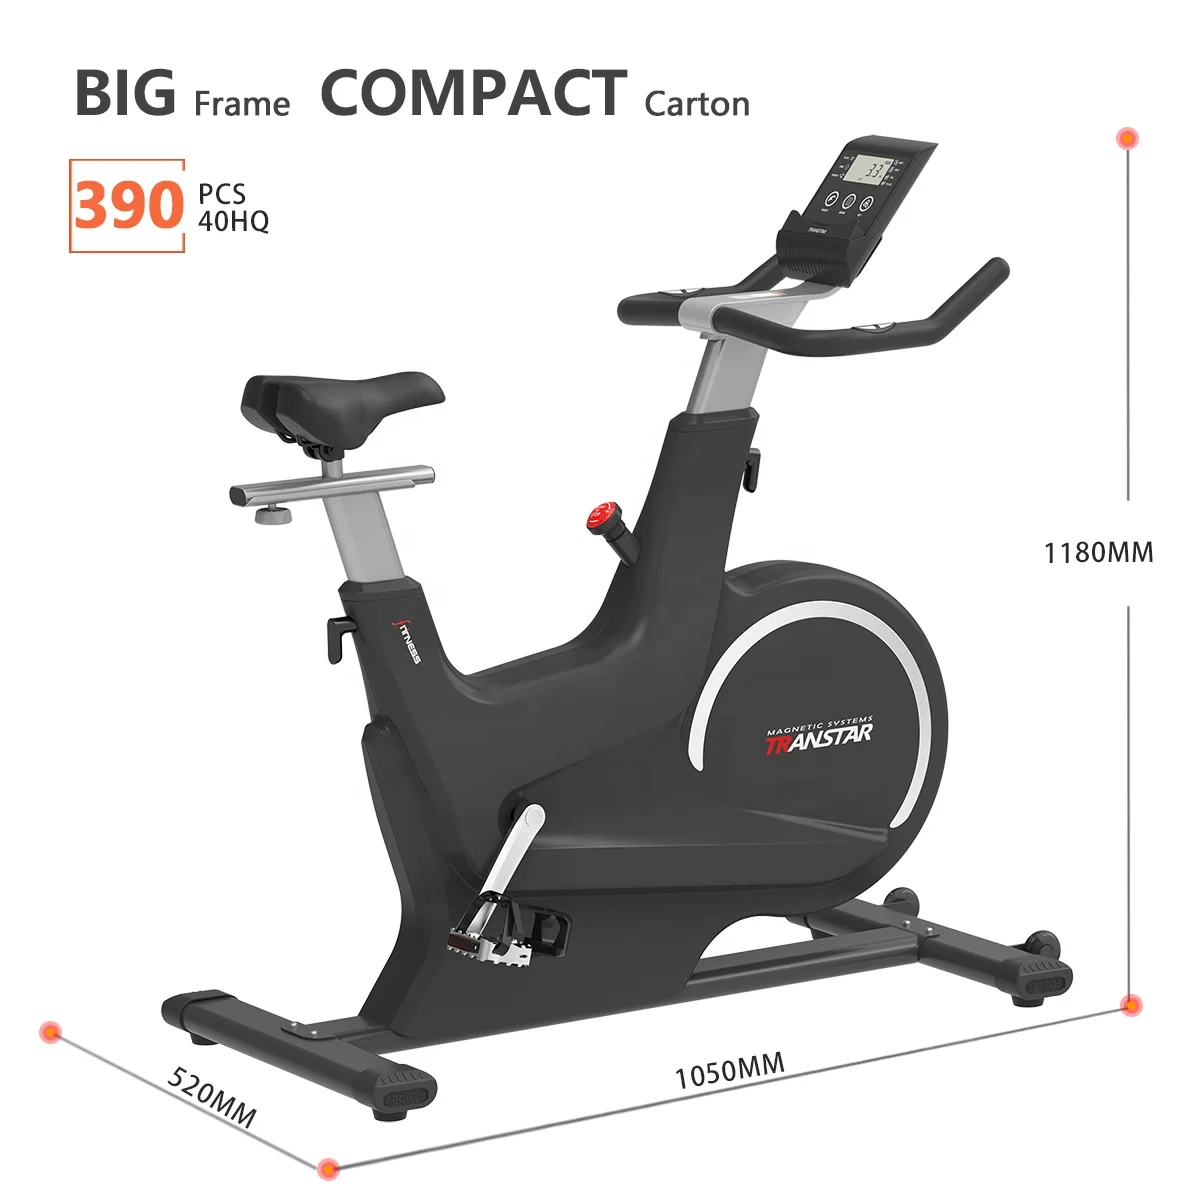 2022 Fitness Cardio Training Home Gym Stationary Air Bike Exercise Bicycle  Spinning with Bluetooth App Zwift Smart Screen| | - AliExpress